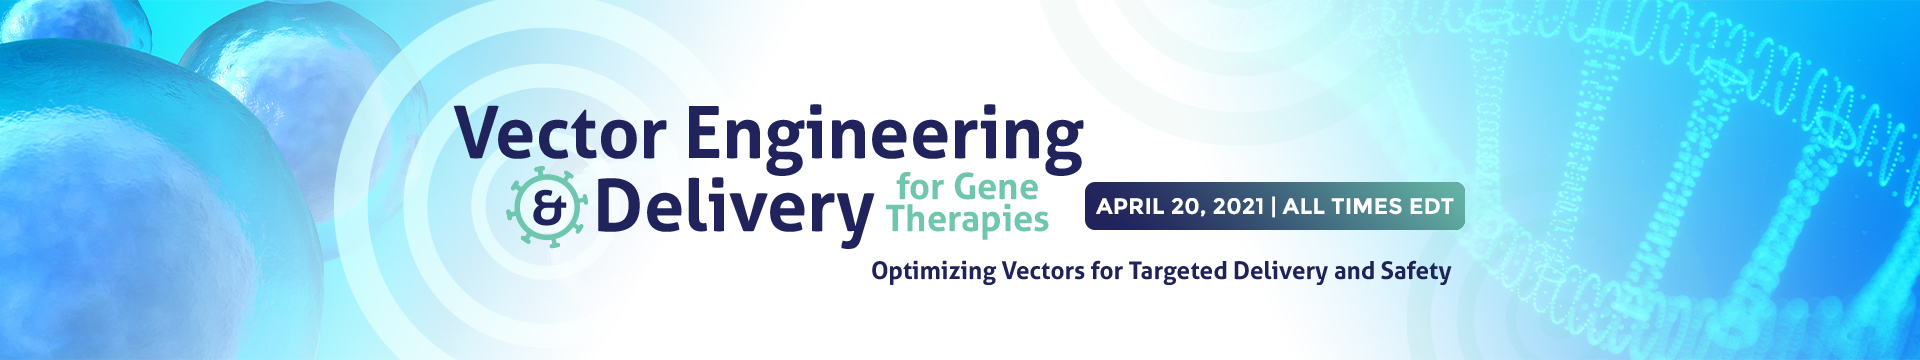 Vector Engineering & Delivery for Gene Therapies 2021 banner